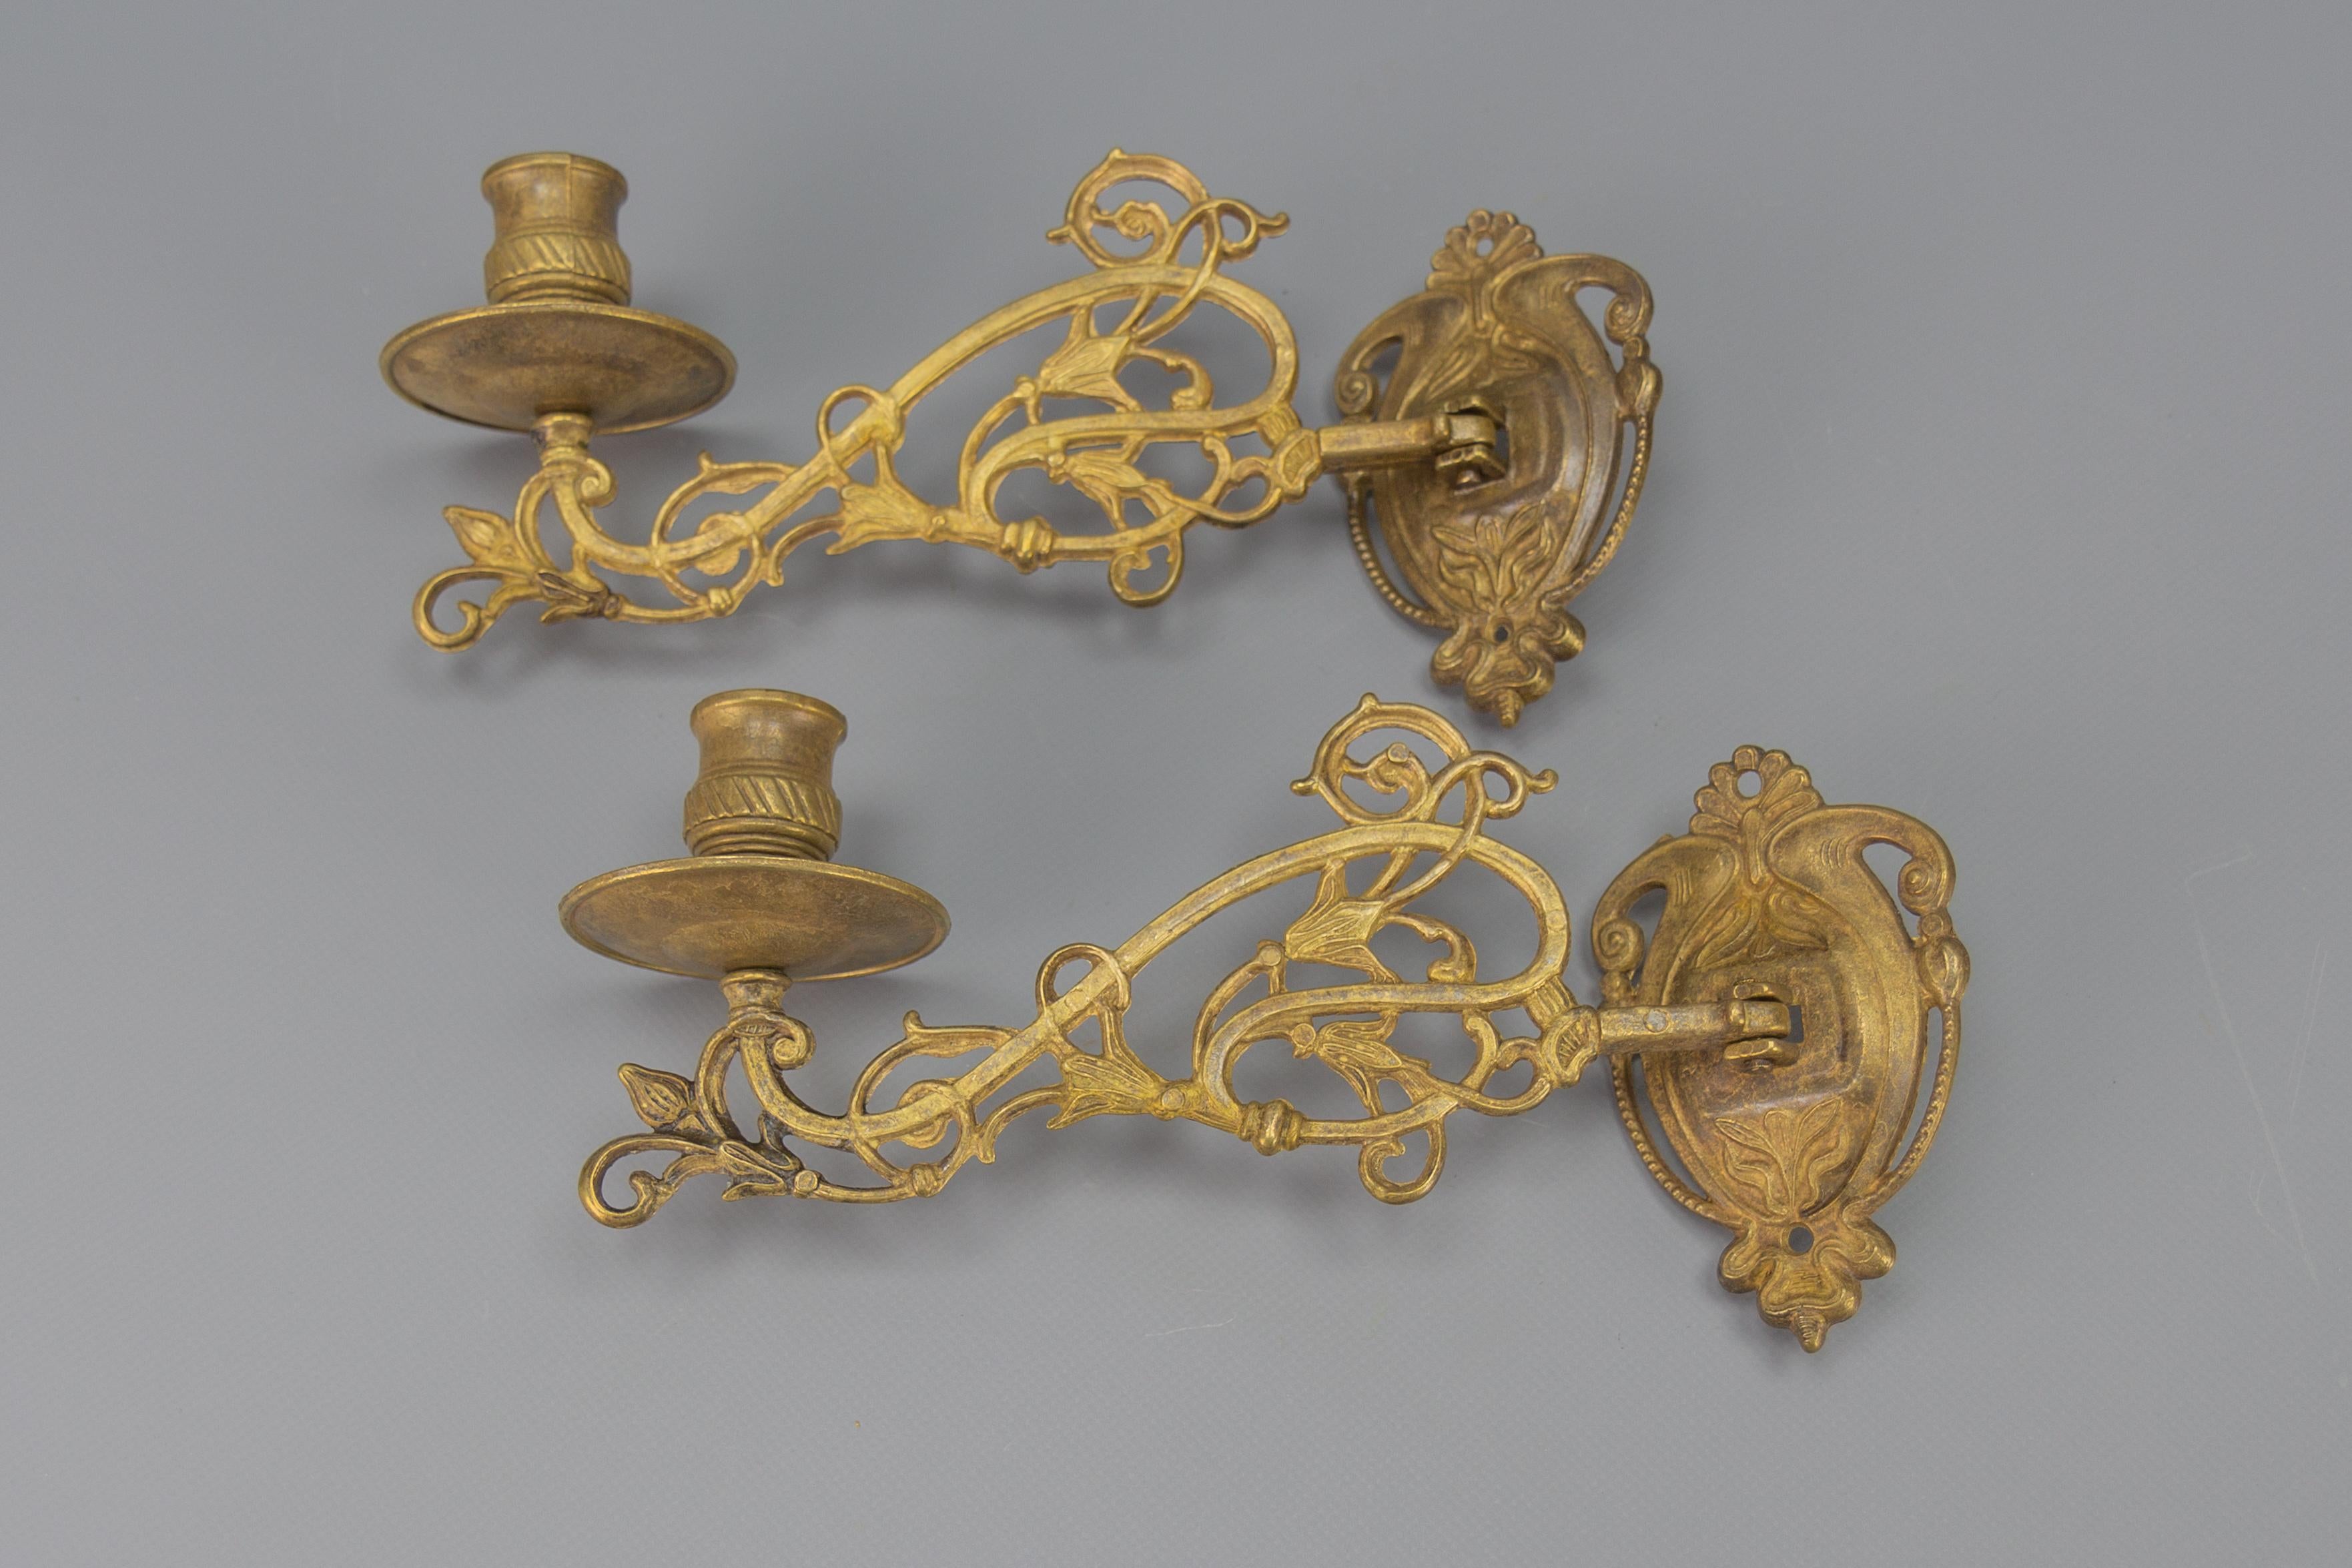 An ornate pair of French Art Nouveau style piano or wall lights, candleholders from circa the 1950s. Each sconce has one arm for one candle, decorated with beautiful Art Nouveau-style flower motifs. Made of metal and brass.
Dimensions: height 12 cm